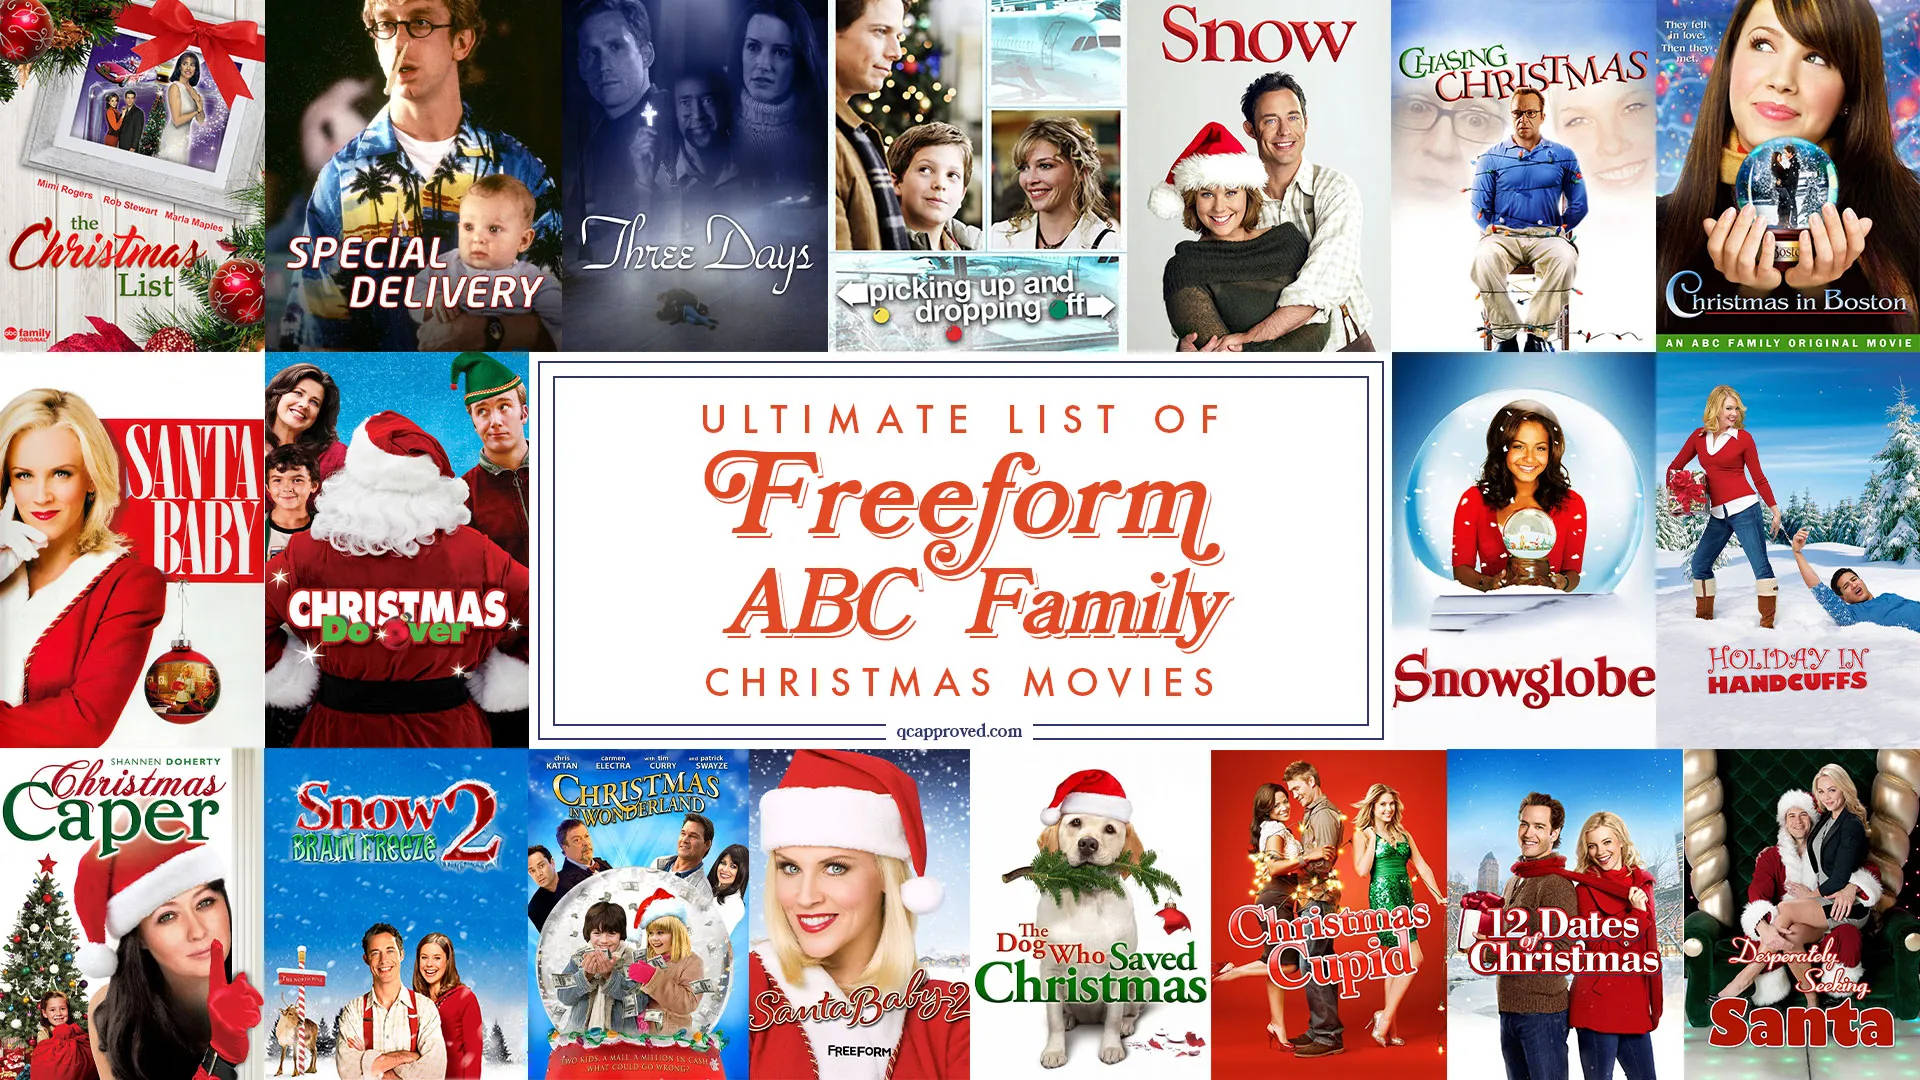 Download Freeform Movies Christmas Collage Wallpaper 